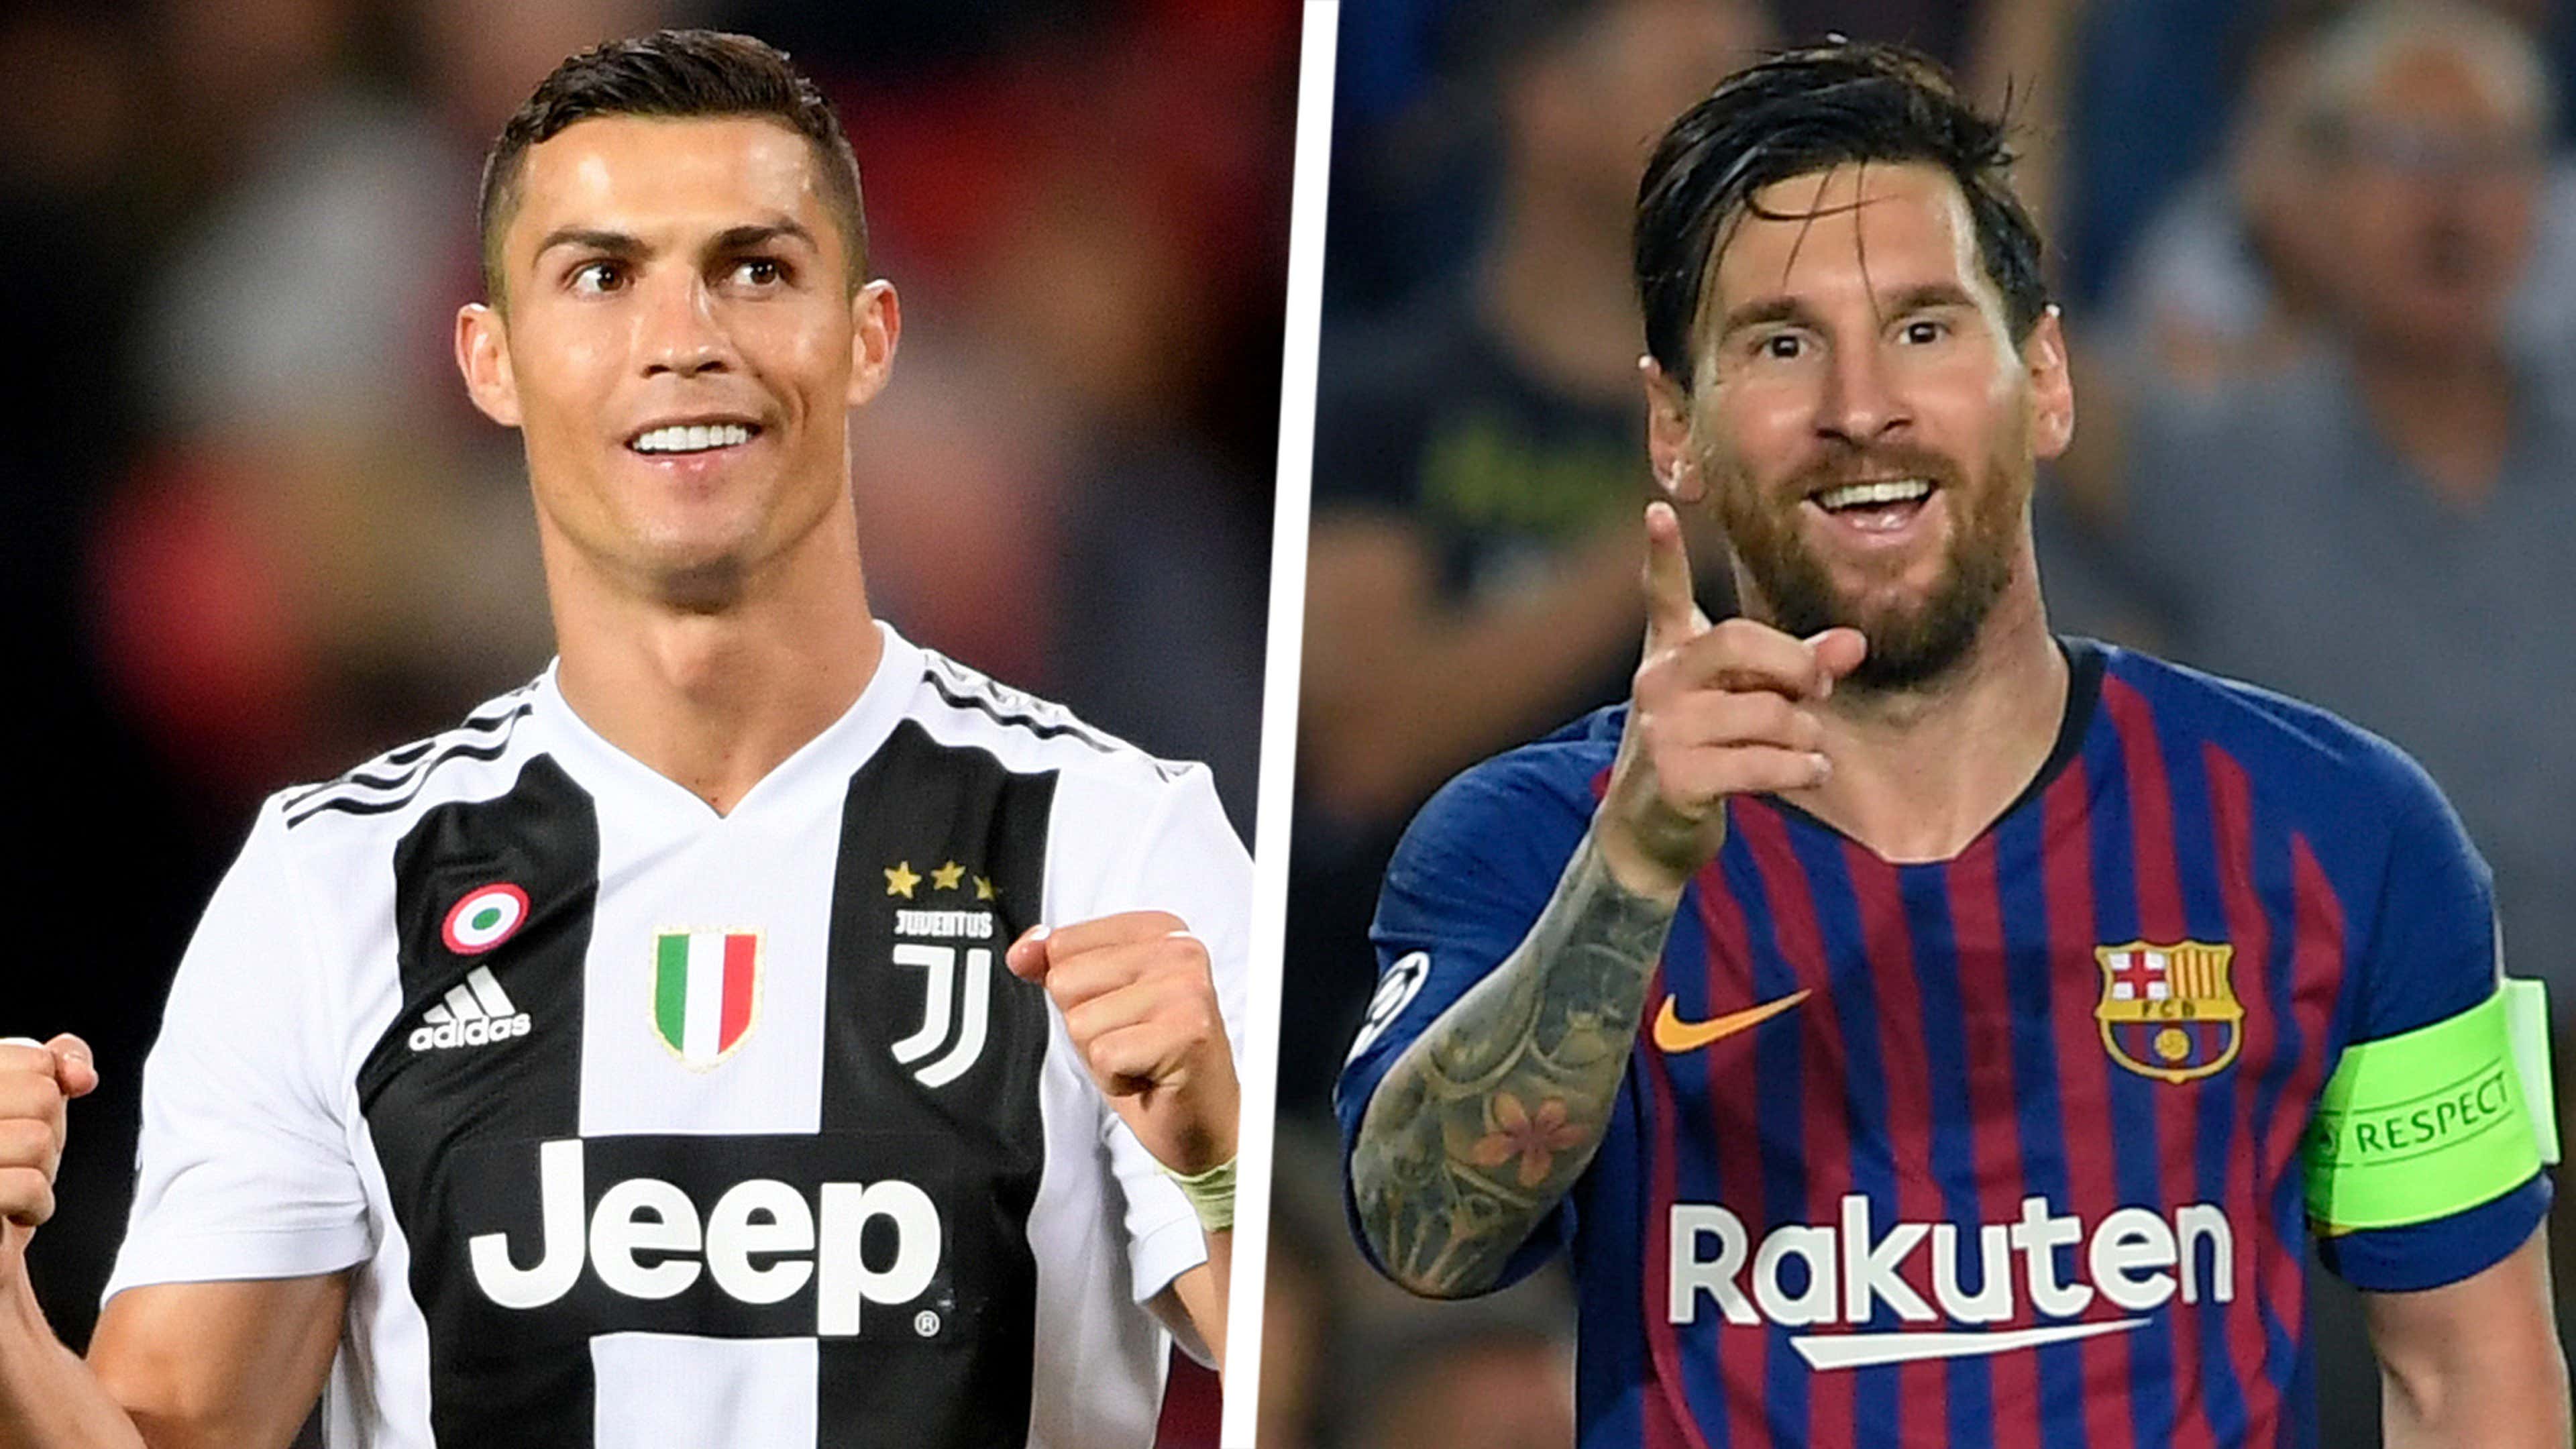 How Cristiano Ronaldo and Lionel Messi Became Superstars On and